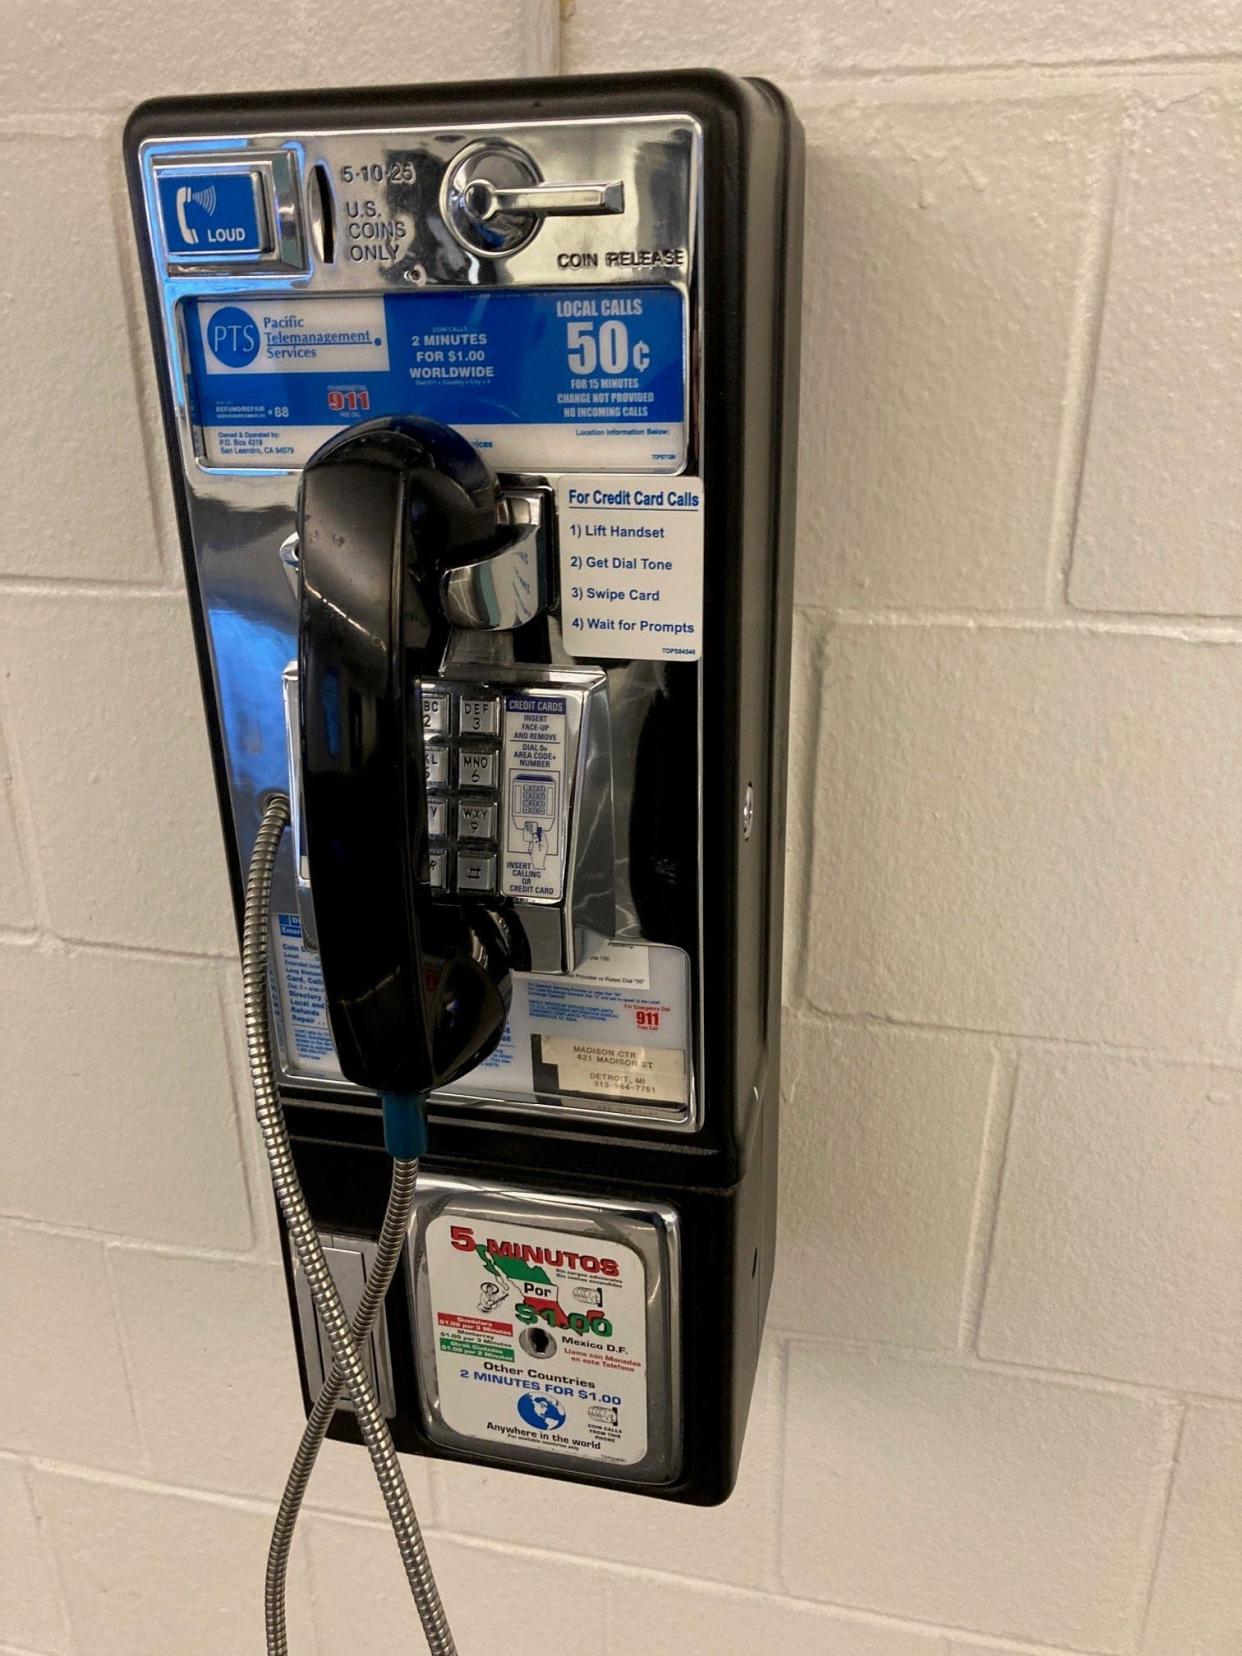 This is one of two pay phones on the wall of the 36th District Court in downtown Detroit. Neither phone had a dial tone.